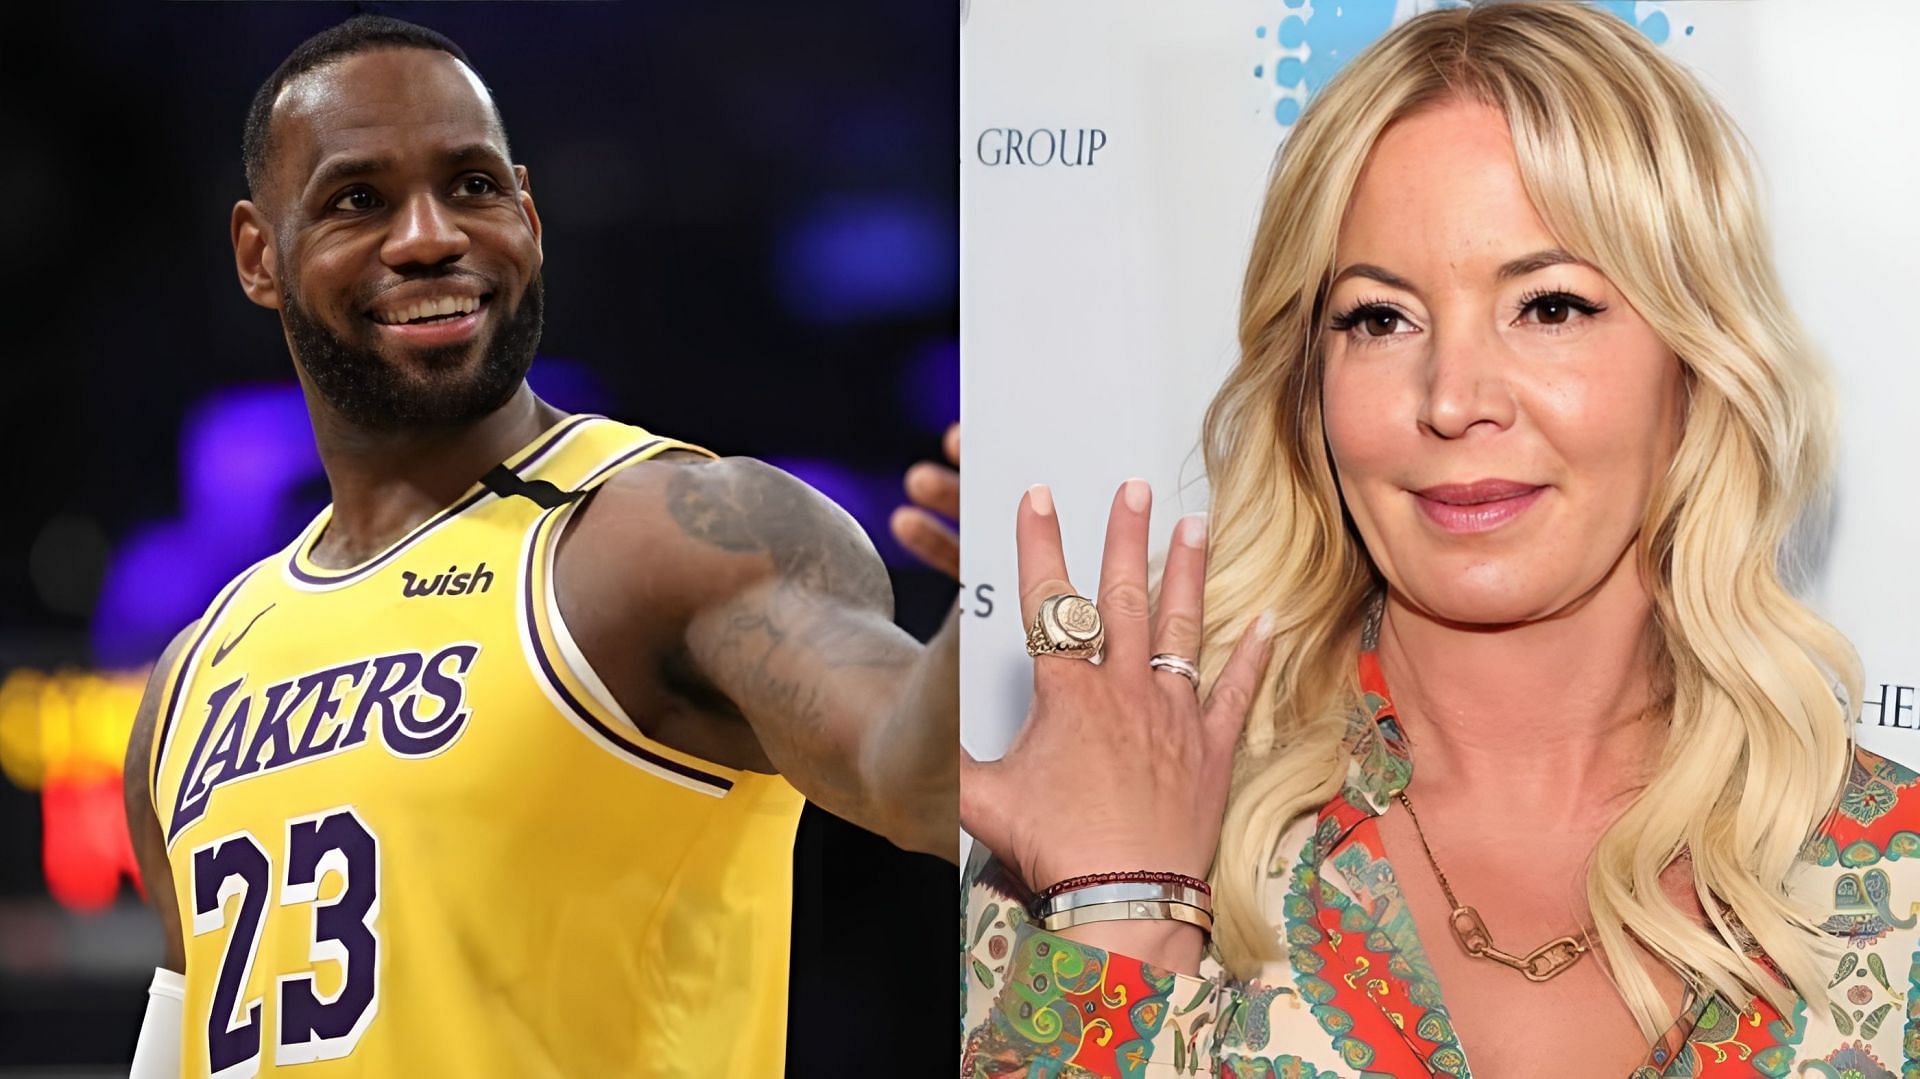 LA Lakers star forward LeBron James and Lakers owner Jeanie Buss